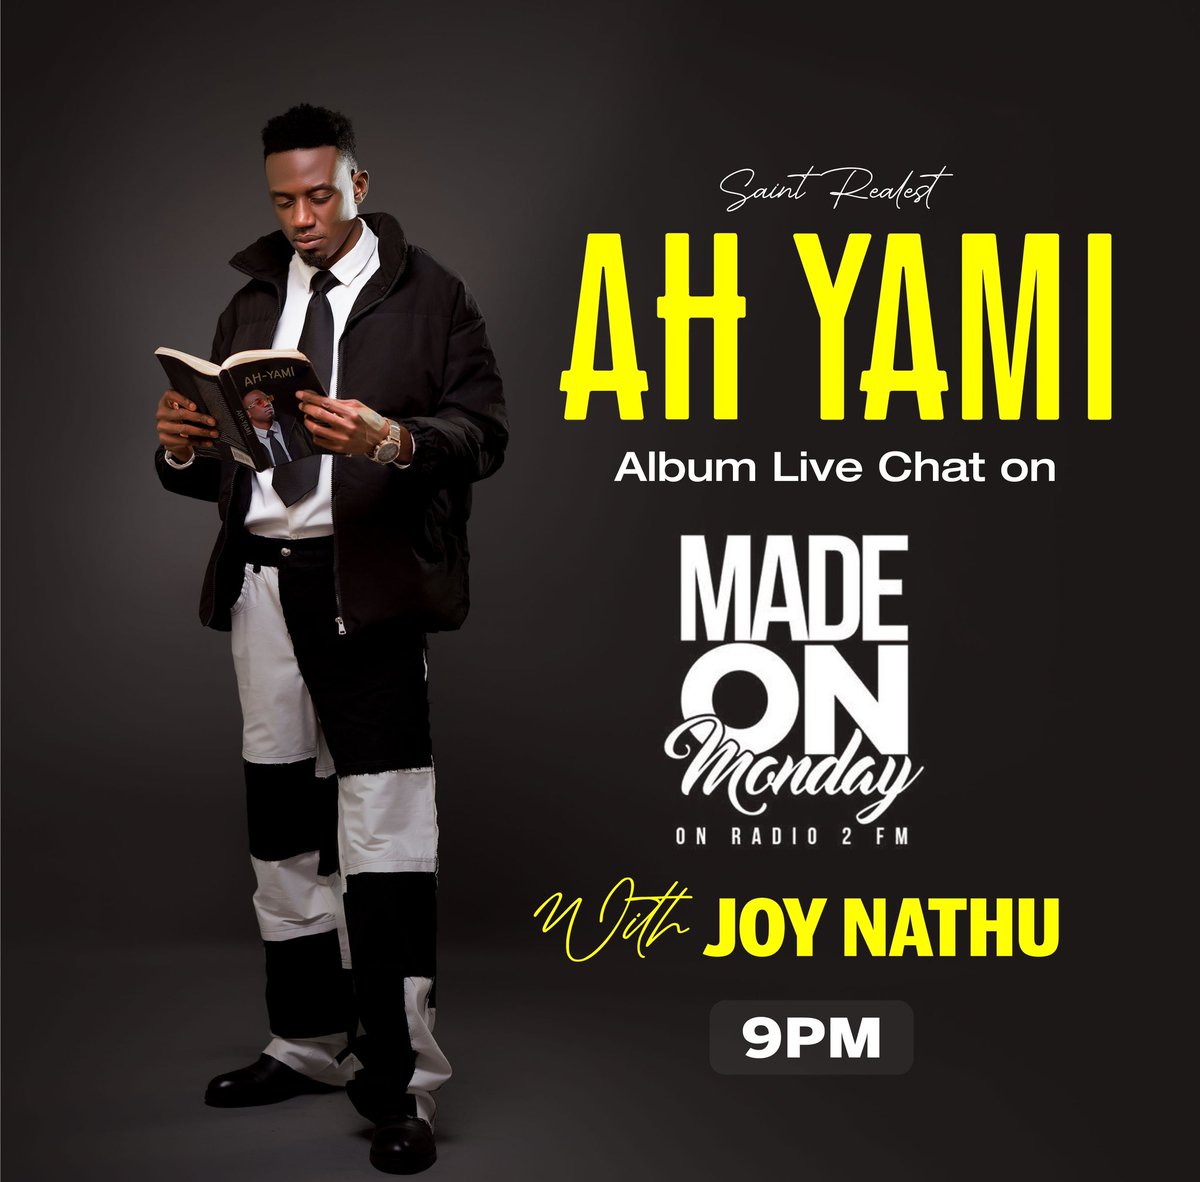 Today marks the release of ‘Ah Yami,’ my latest album, and I hope you’re loving it as much as I do! 🎉 Join me on ‘Made on Monday’ with @Joynathu later tonight for a live chat. For now, stream and share the album right here…. saintrealest.fanlink.to/AhYami